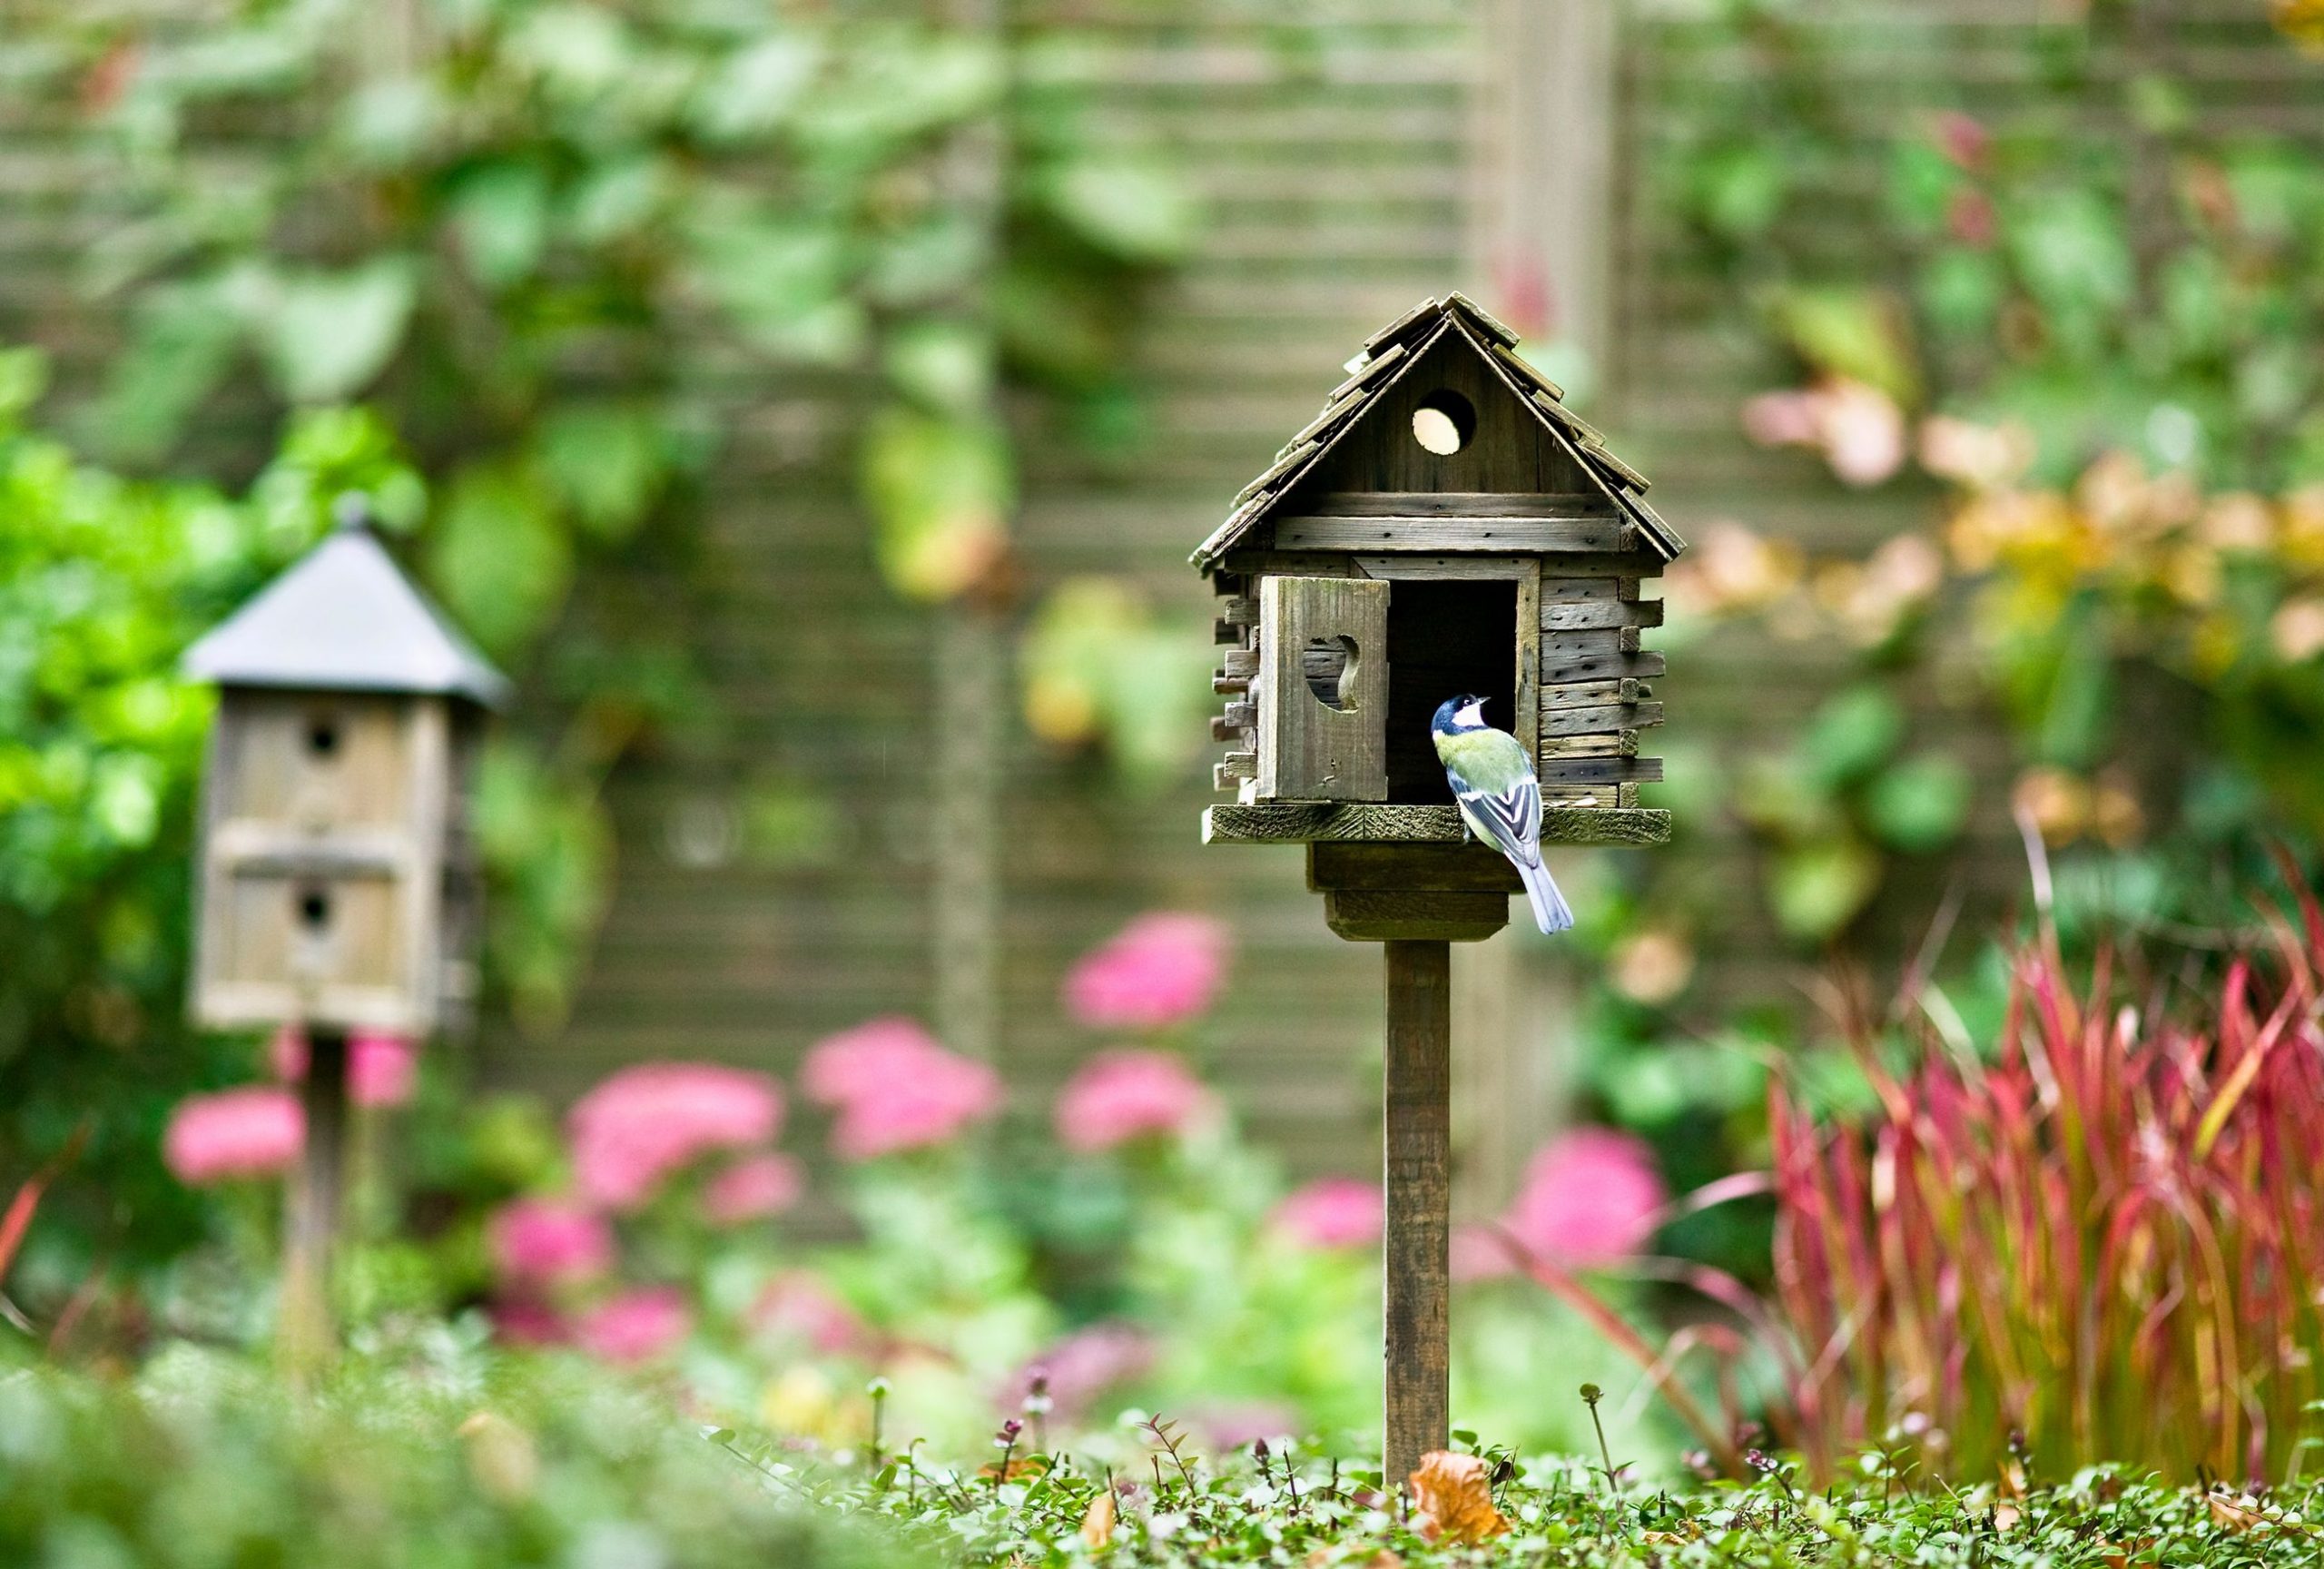 How to Attract Wildlife, Insects and Nature to Your Garden